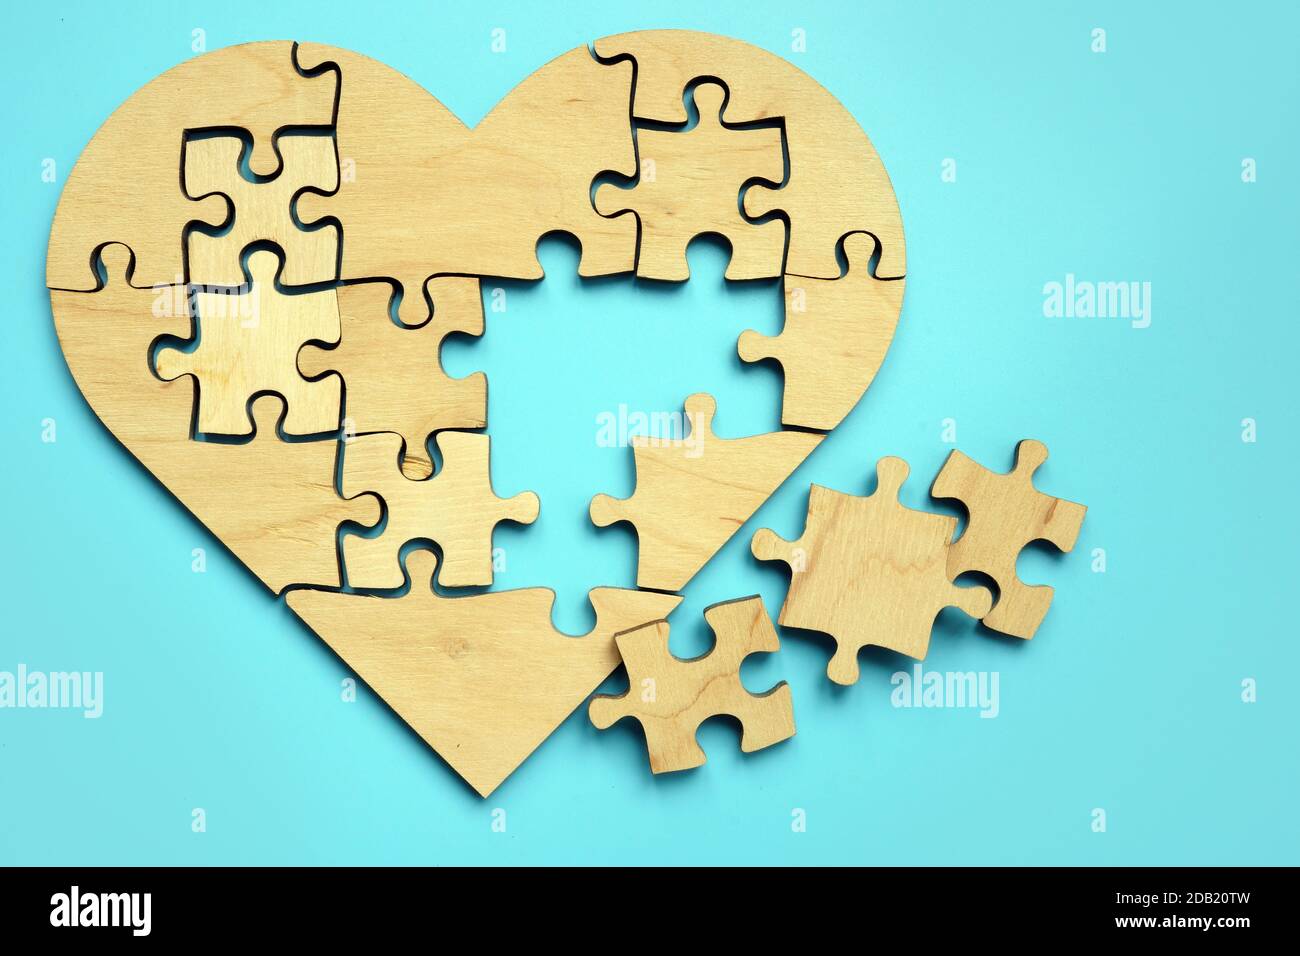 Heart made from puzzle pieces. Disease and treatment symbol. Stock Photo